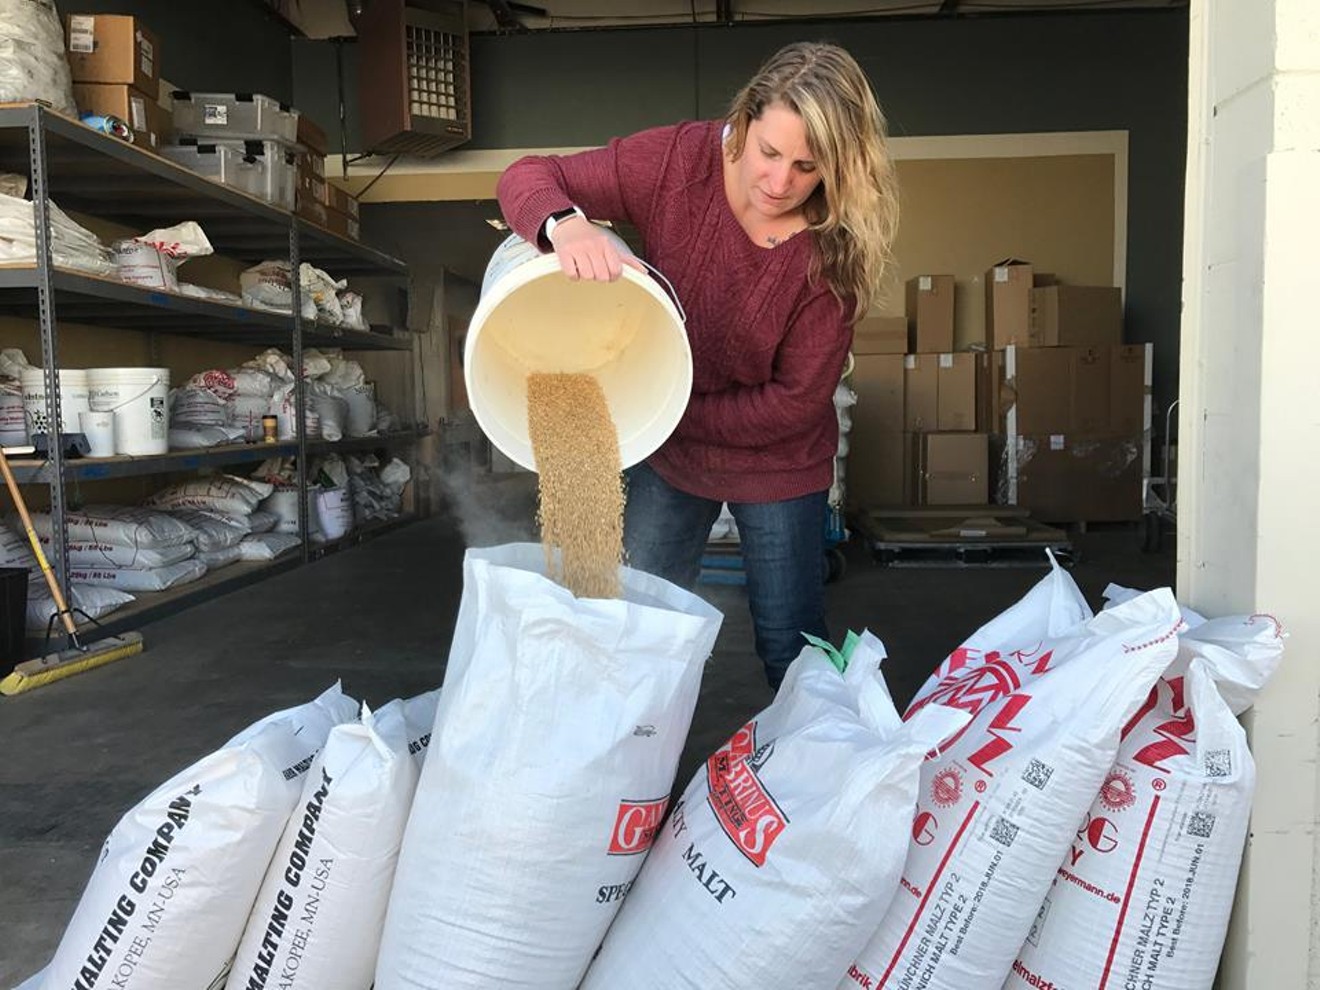 Lone Tree taproom manager Emily preps the malt for brew day.